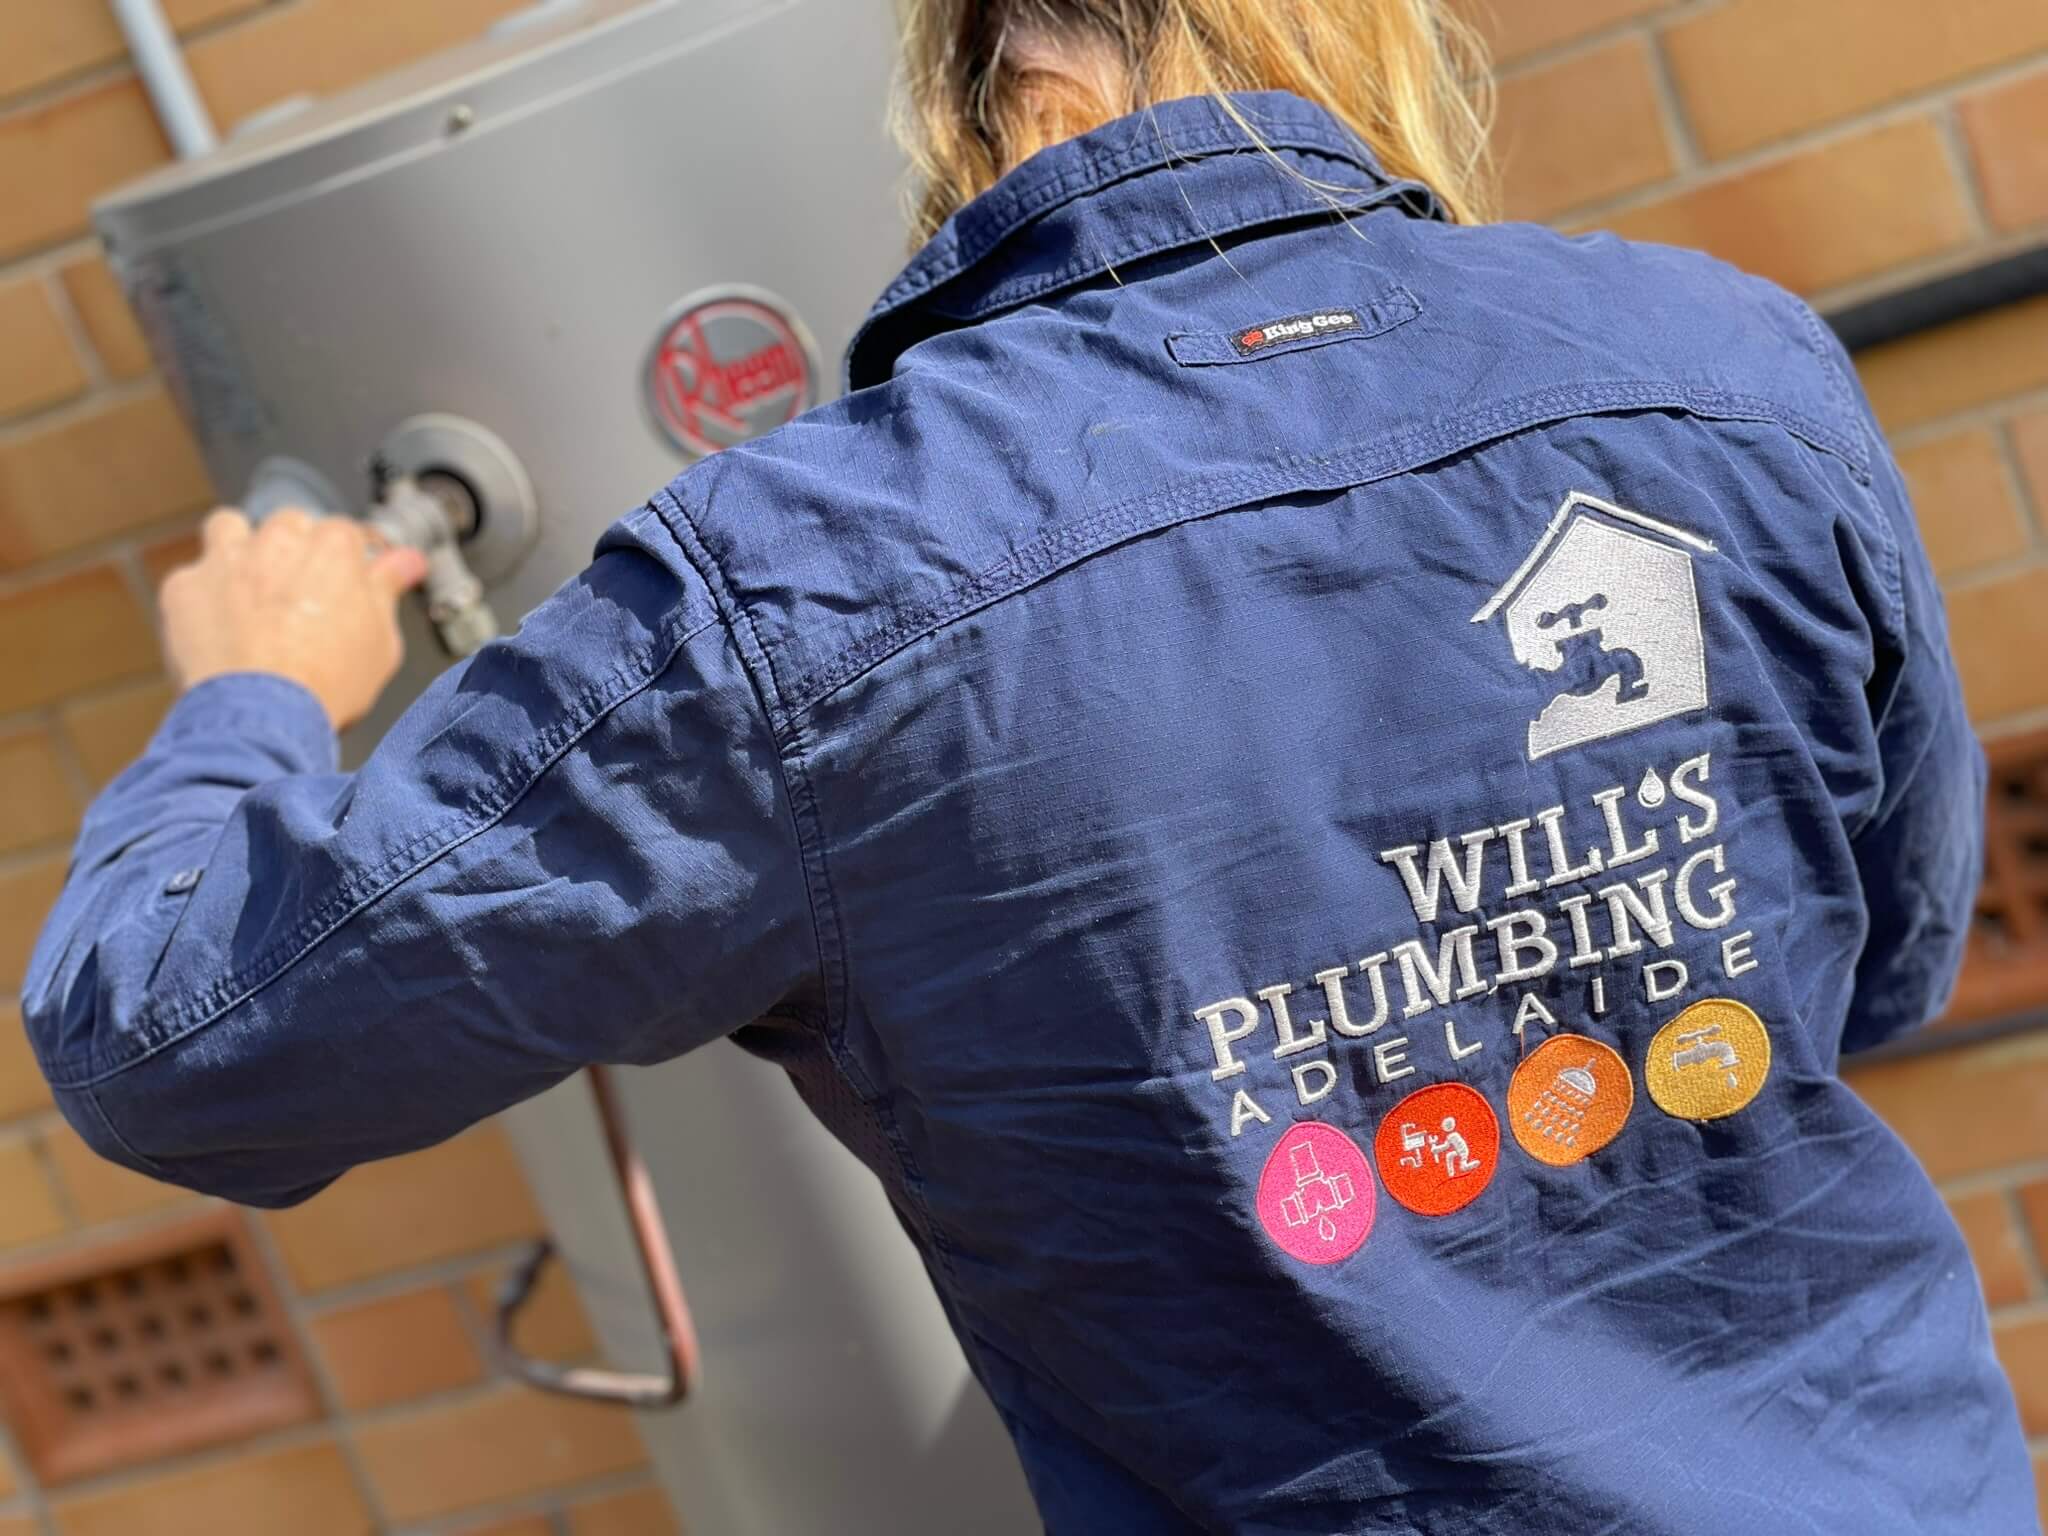 Plumbing Services in Whites Valley